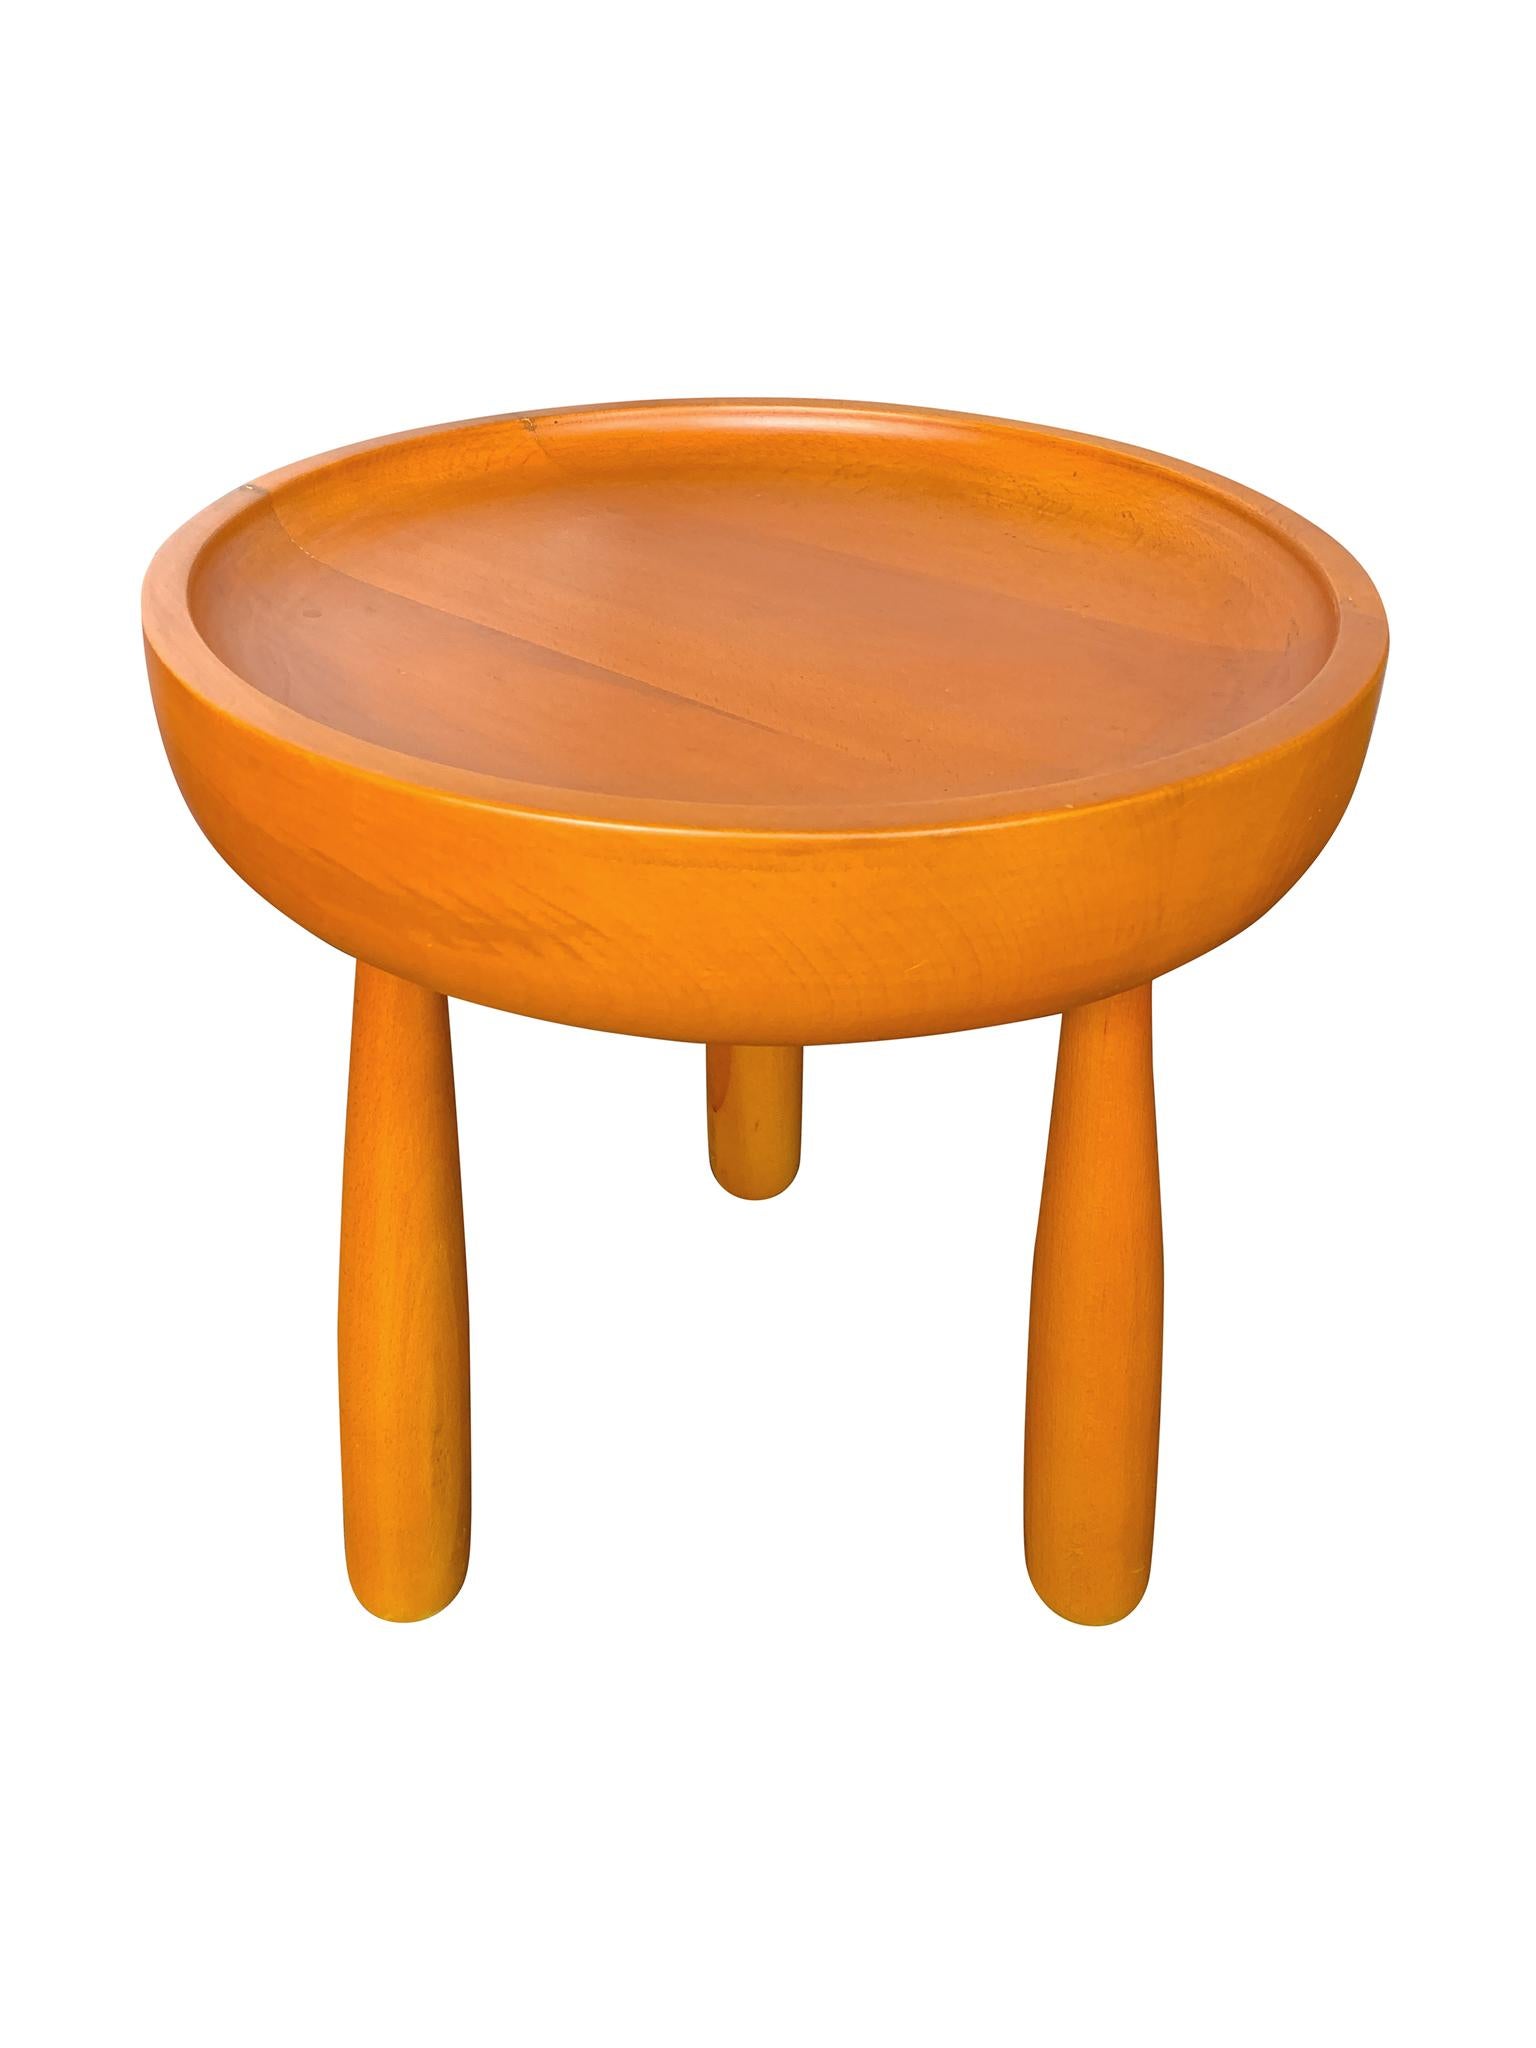 Pair of 20th century round stool side tables. Designed in the style of Sergio Rodrigues, they have dish tops and three legs that taper upward. The wood is a beautiful, warm orange-yellow tone.

Dimensions:
15 in. diameter
17 in.